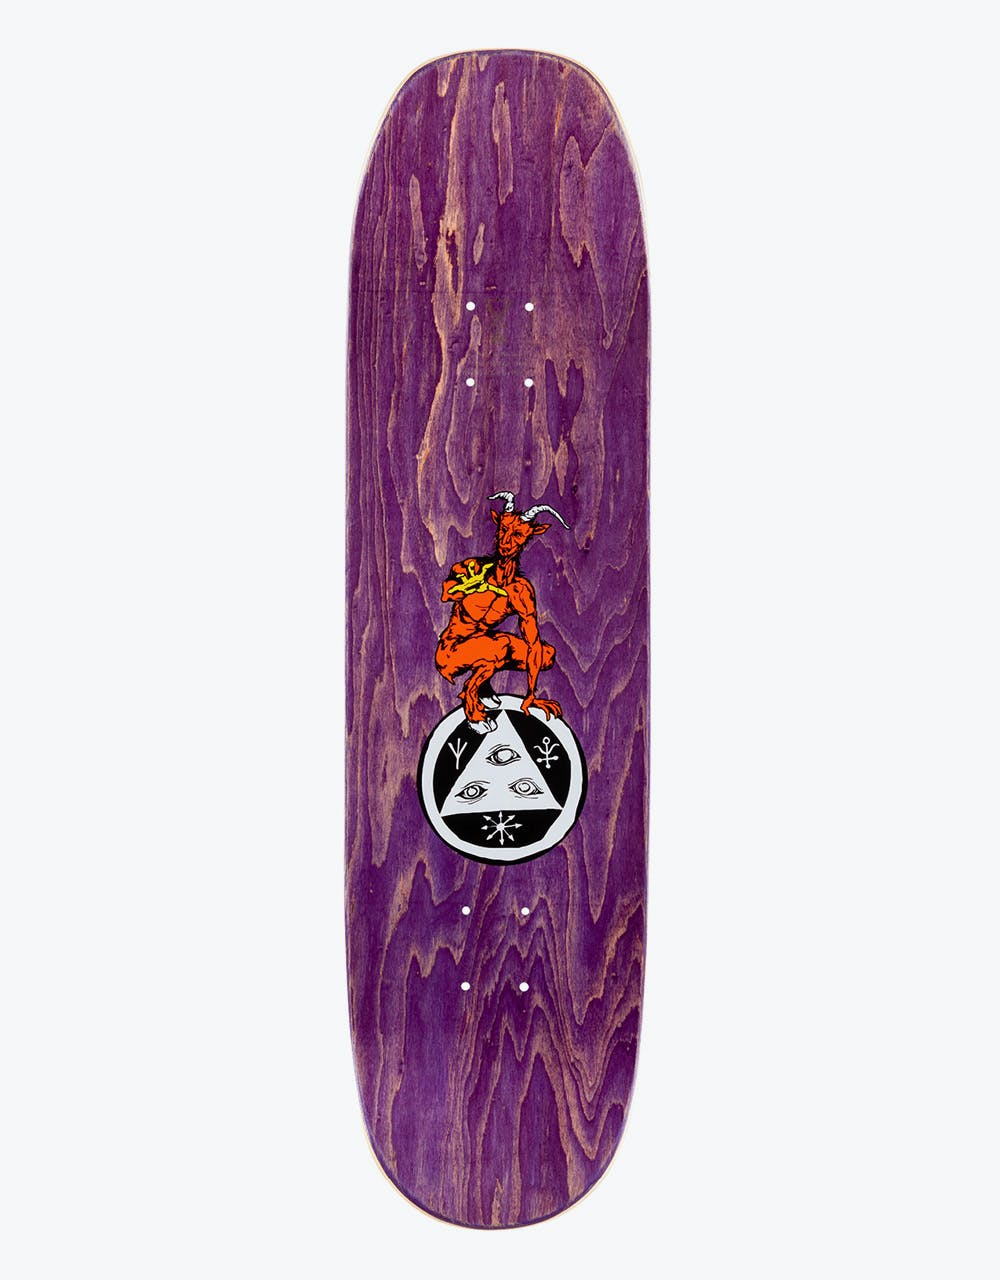 Welcome The Magician on Moontrimmer 2.0 Skateboard Deck - 8.5"